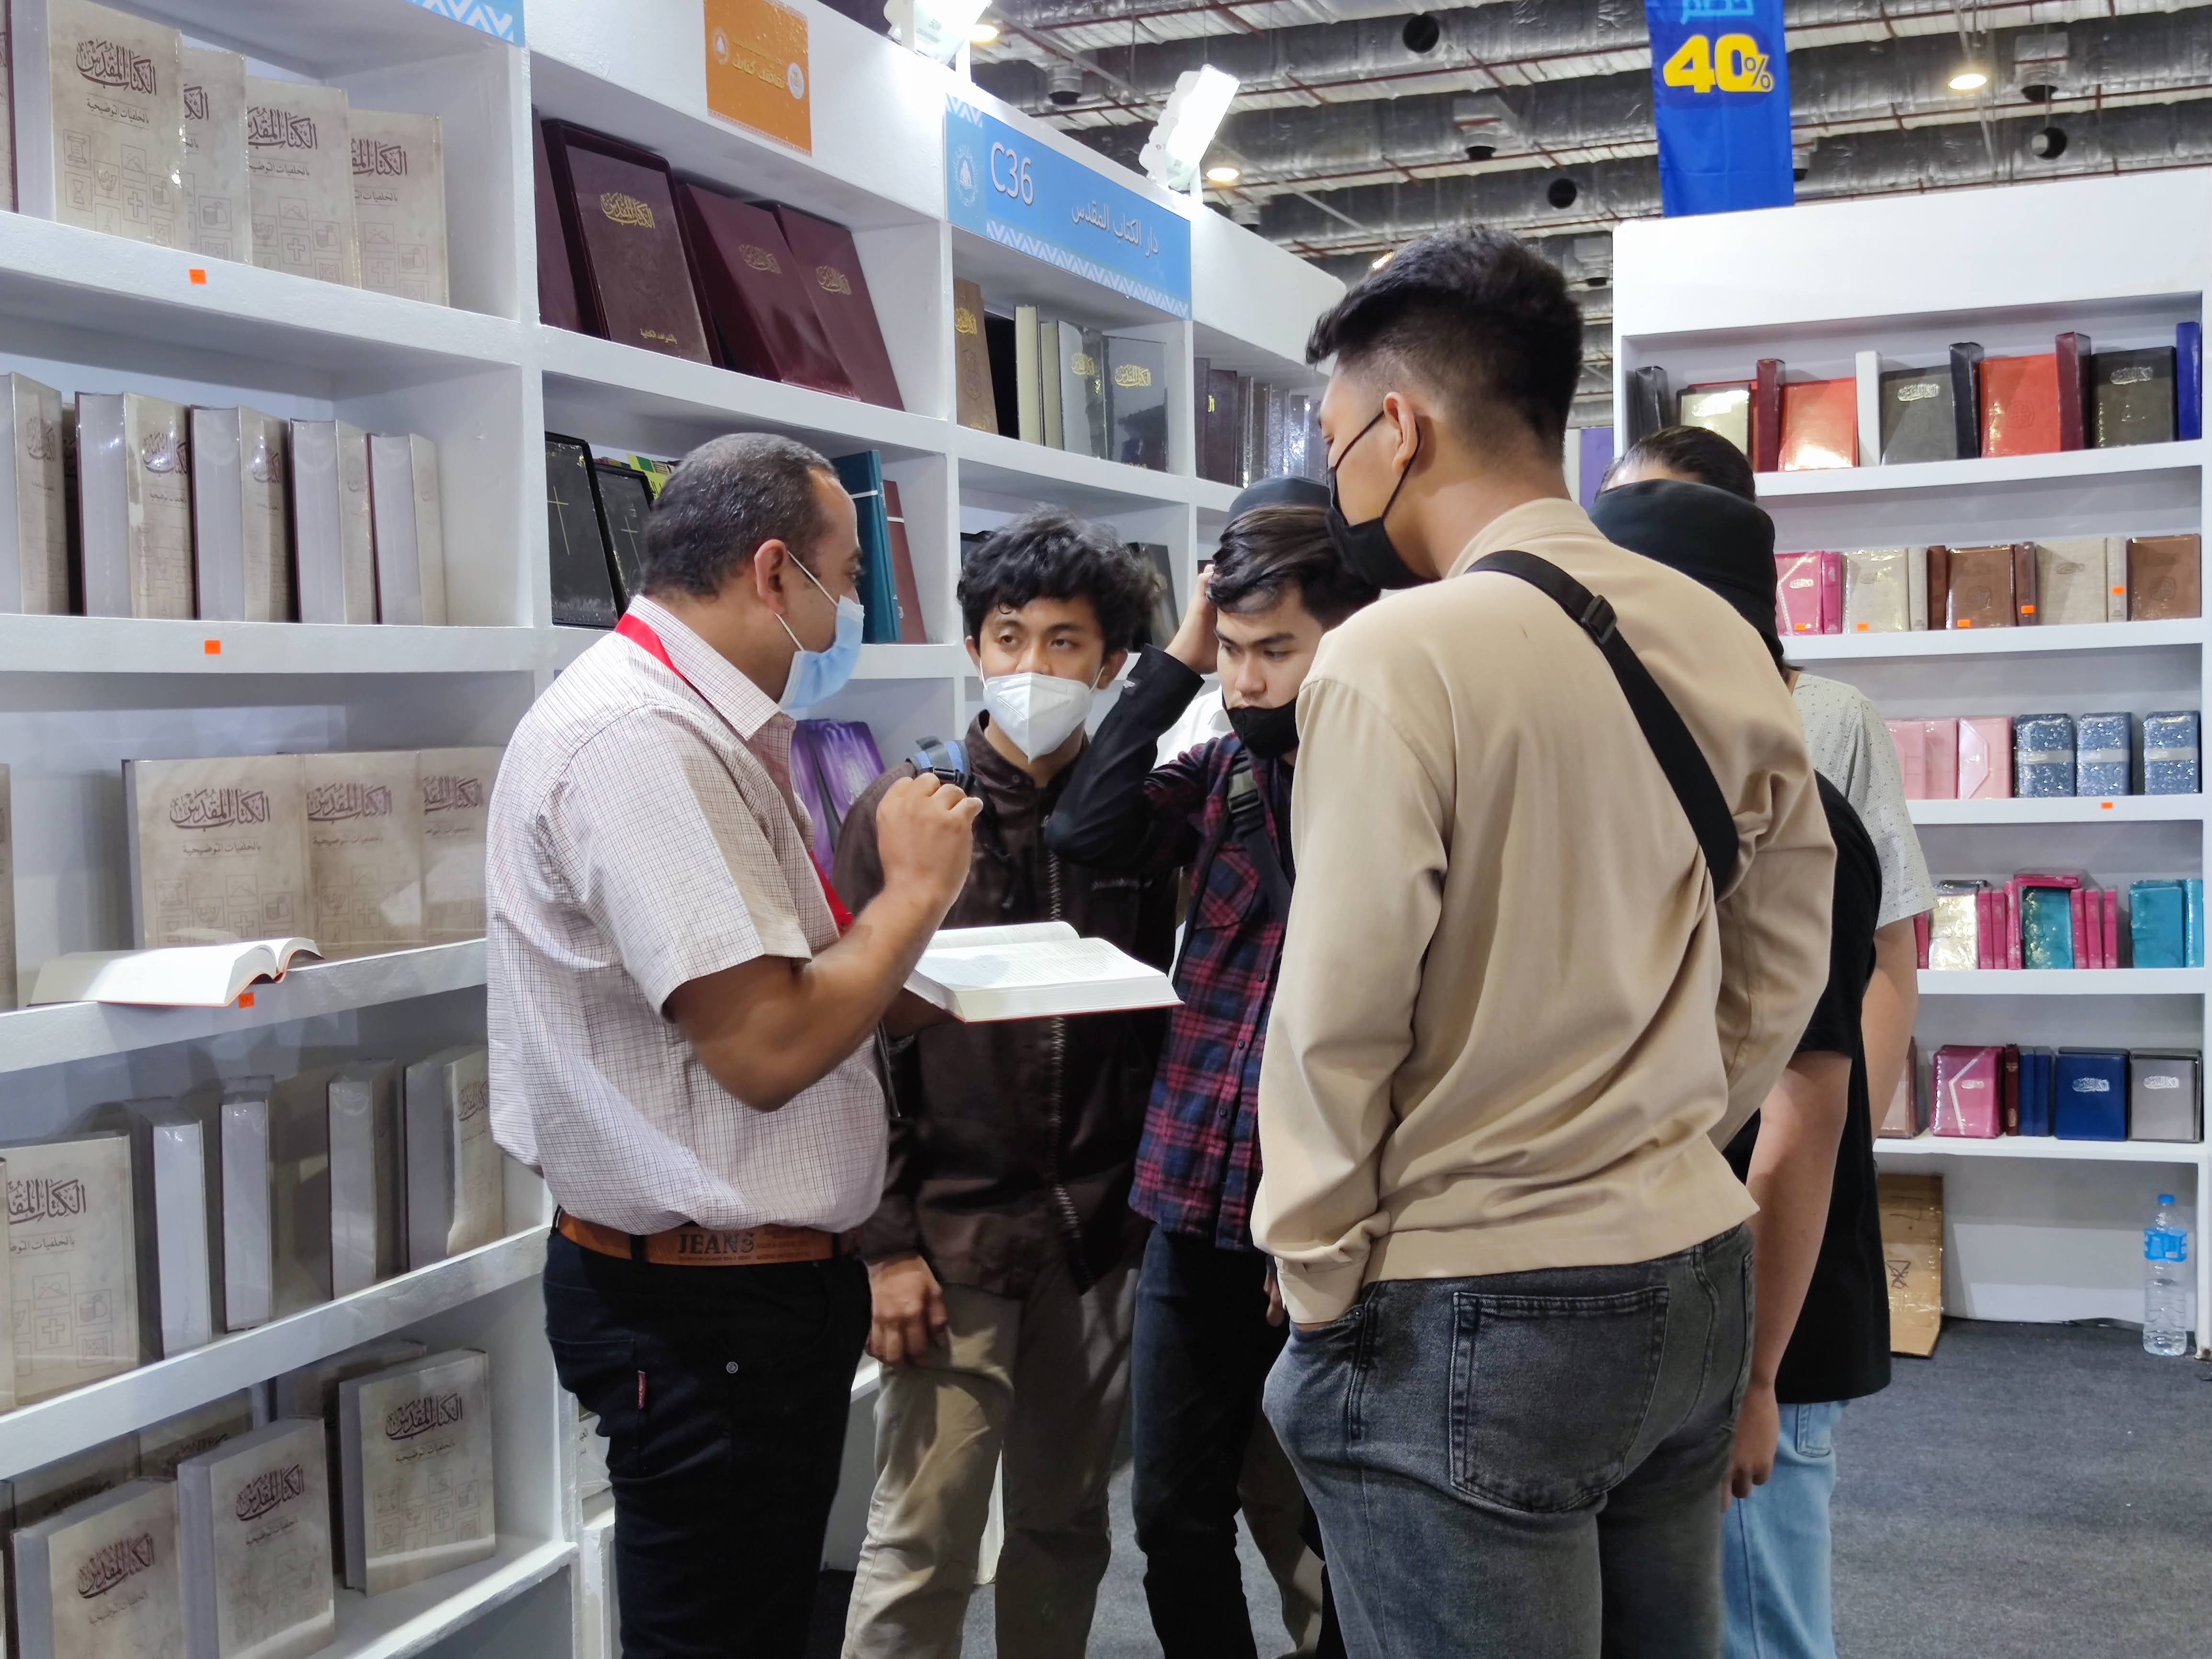 Young visitors to the Bible Society of Egypt’s stand at the Cairo International Bookfair.